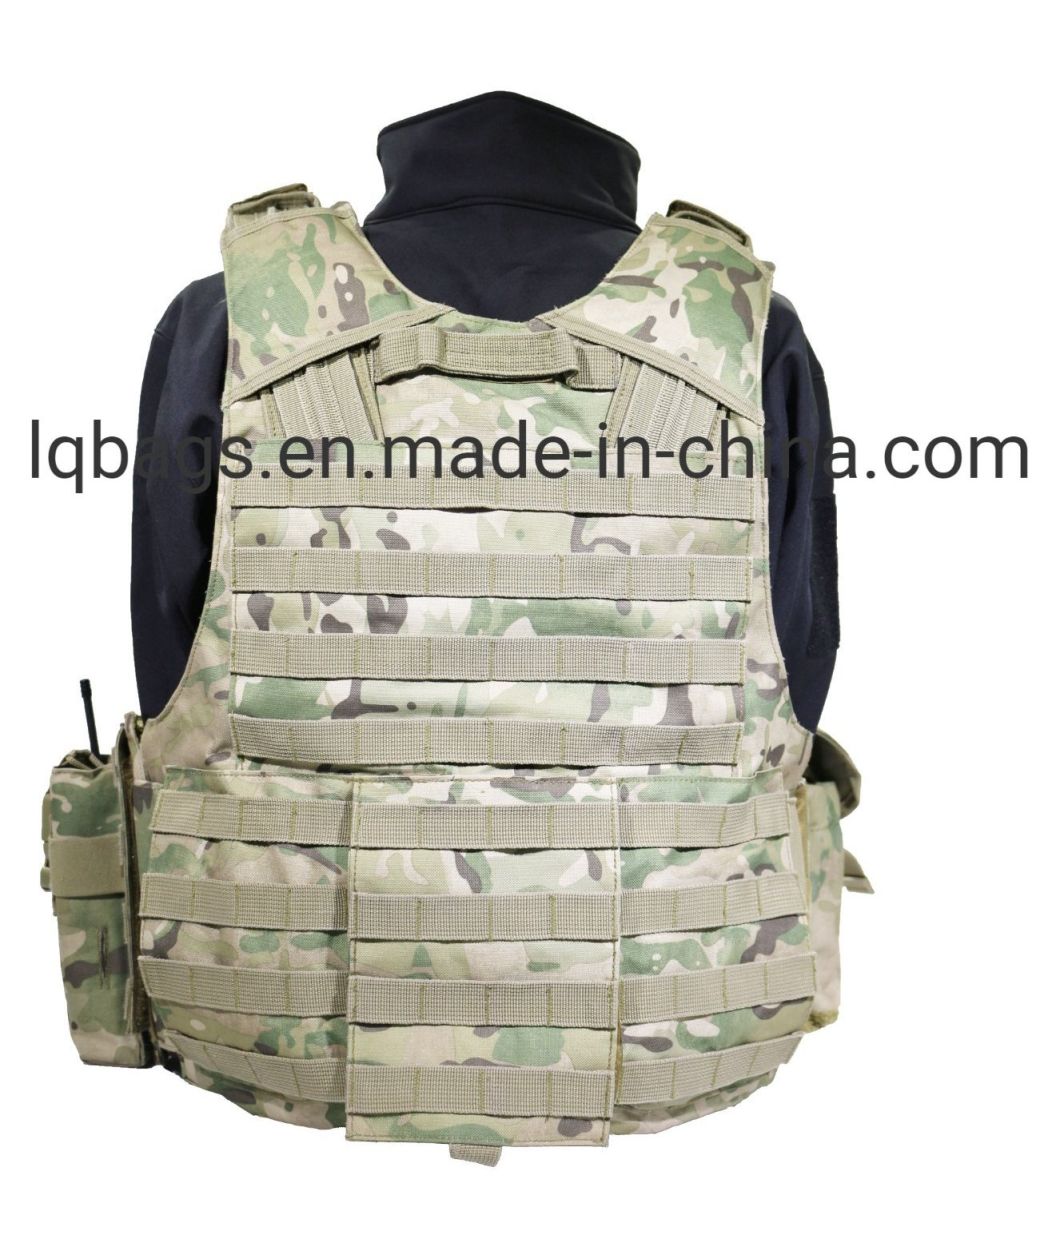 Military Tactical Vest Armor Vest Plate Carrier with Mag Pouch